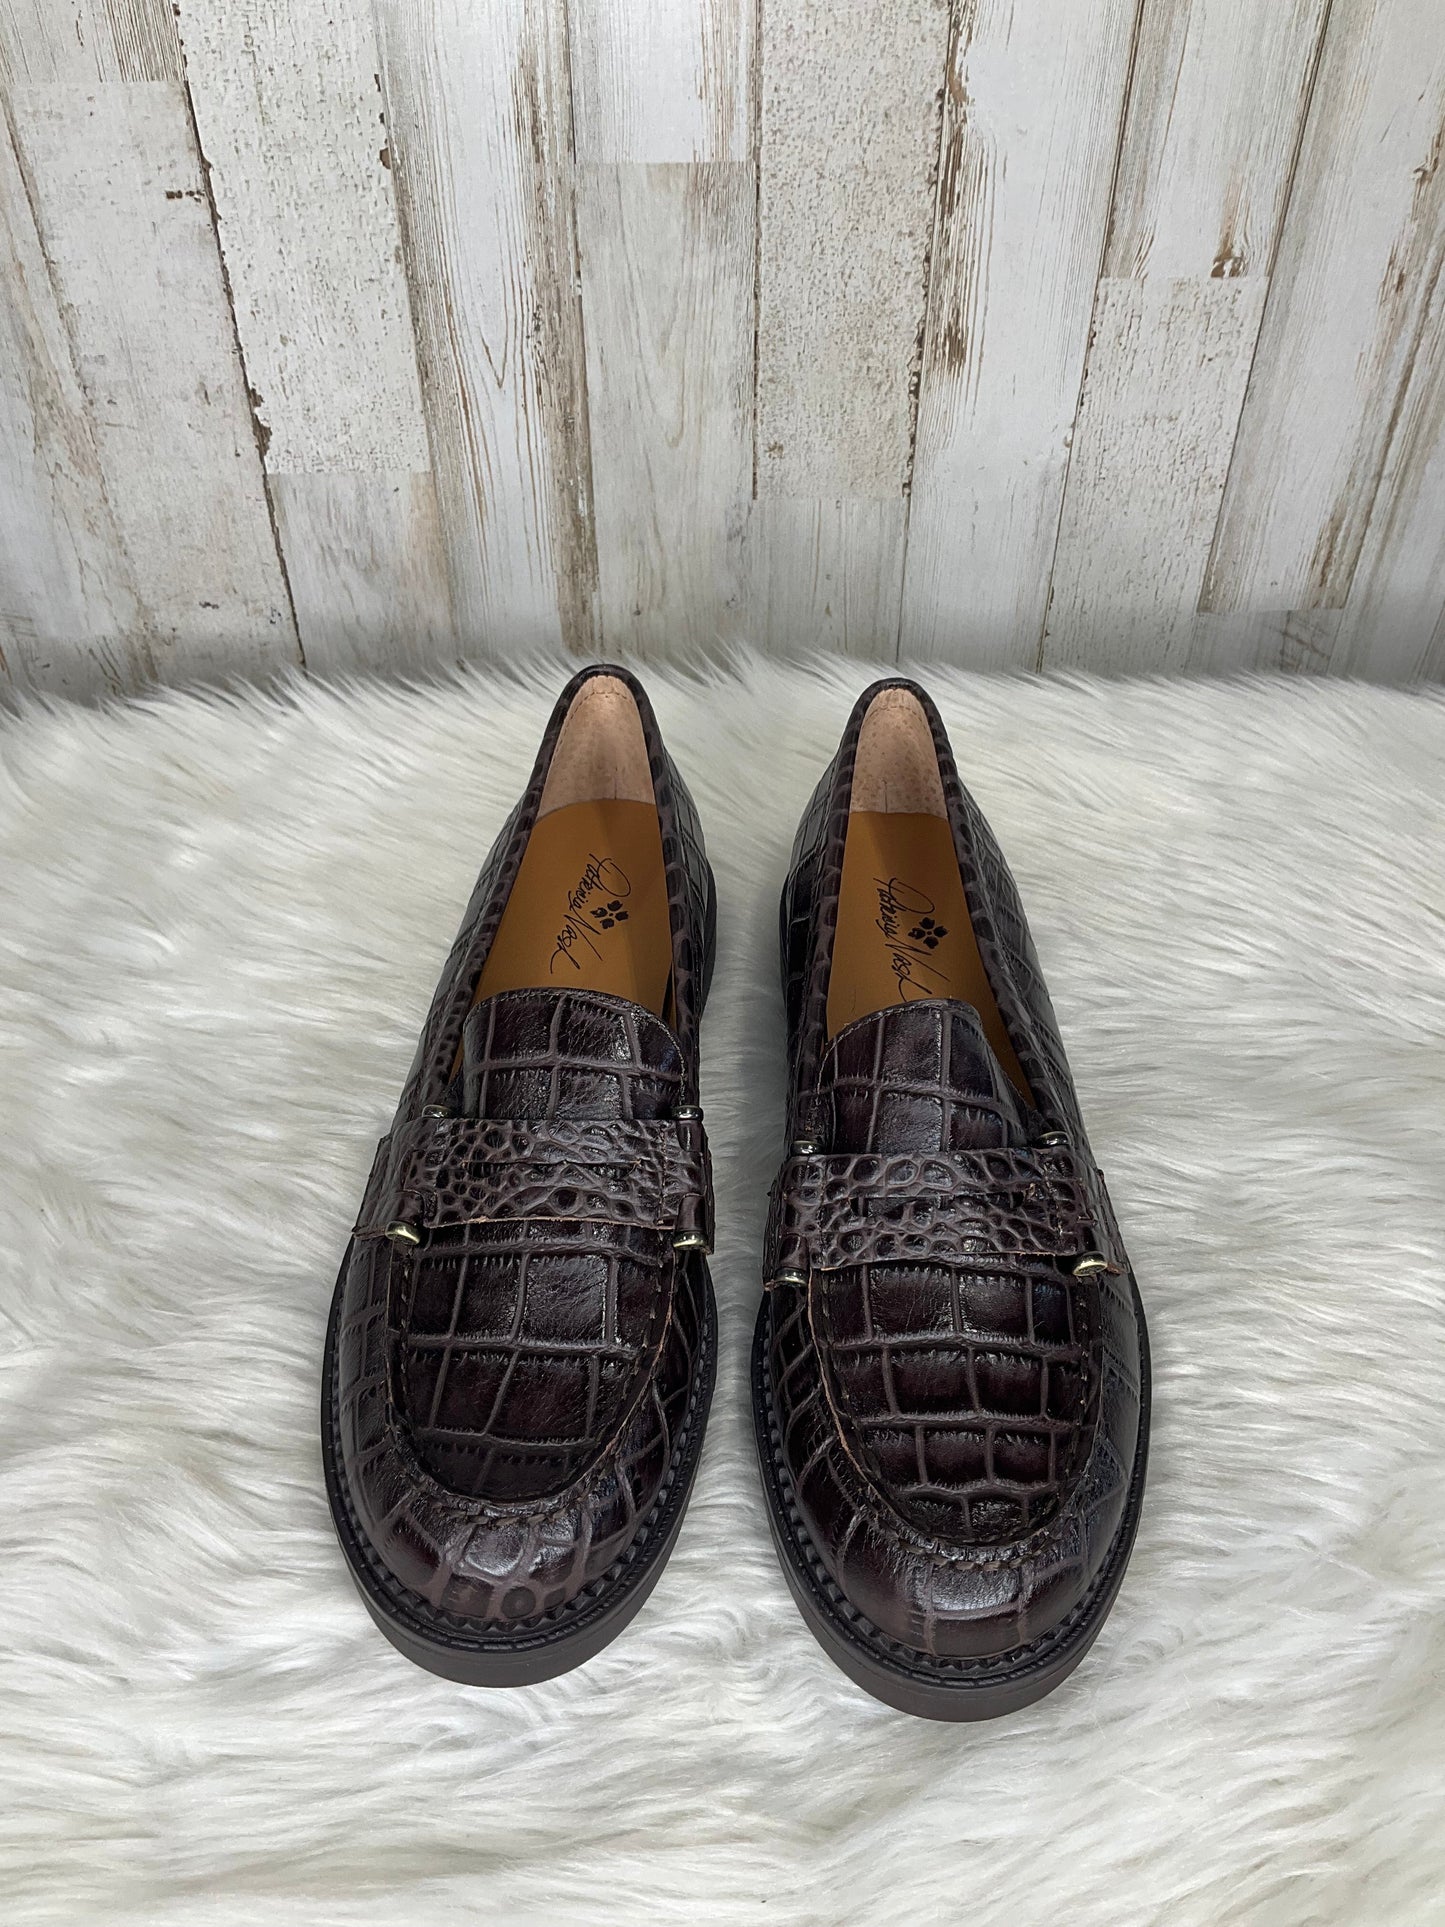 Shoes Flats Loafer Oxford By Patricia Nash  Size: 6